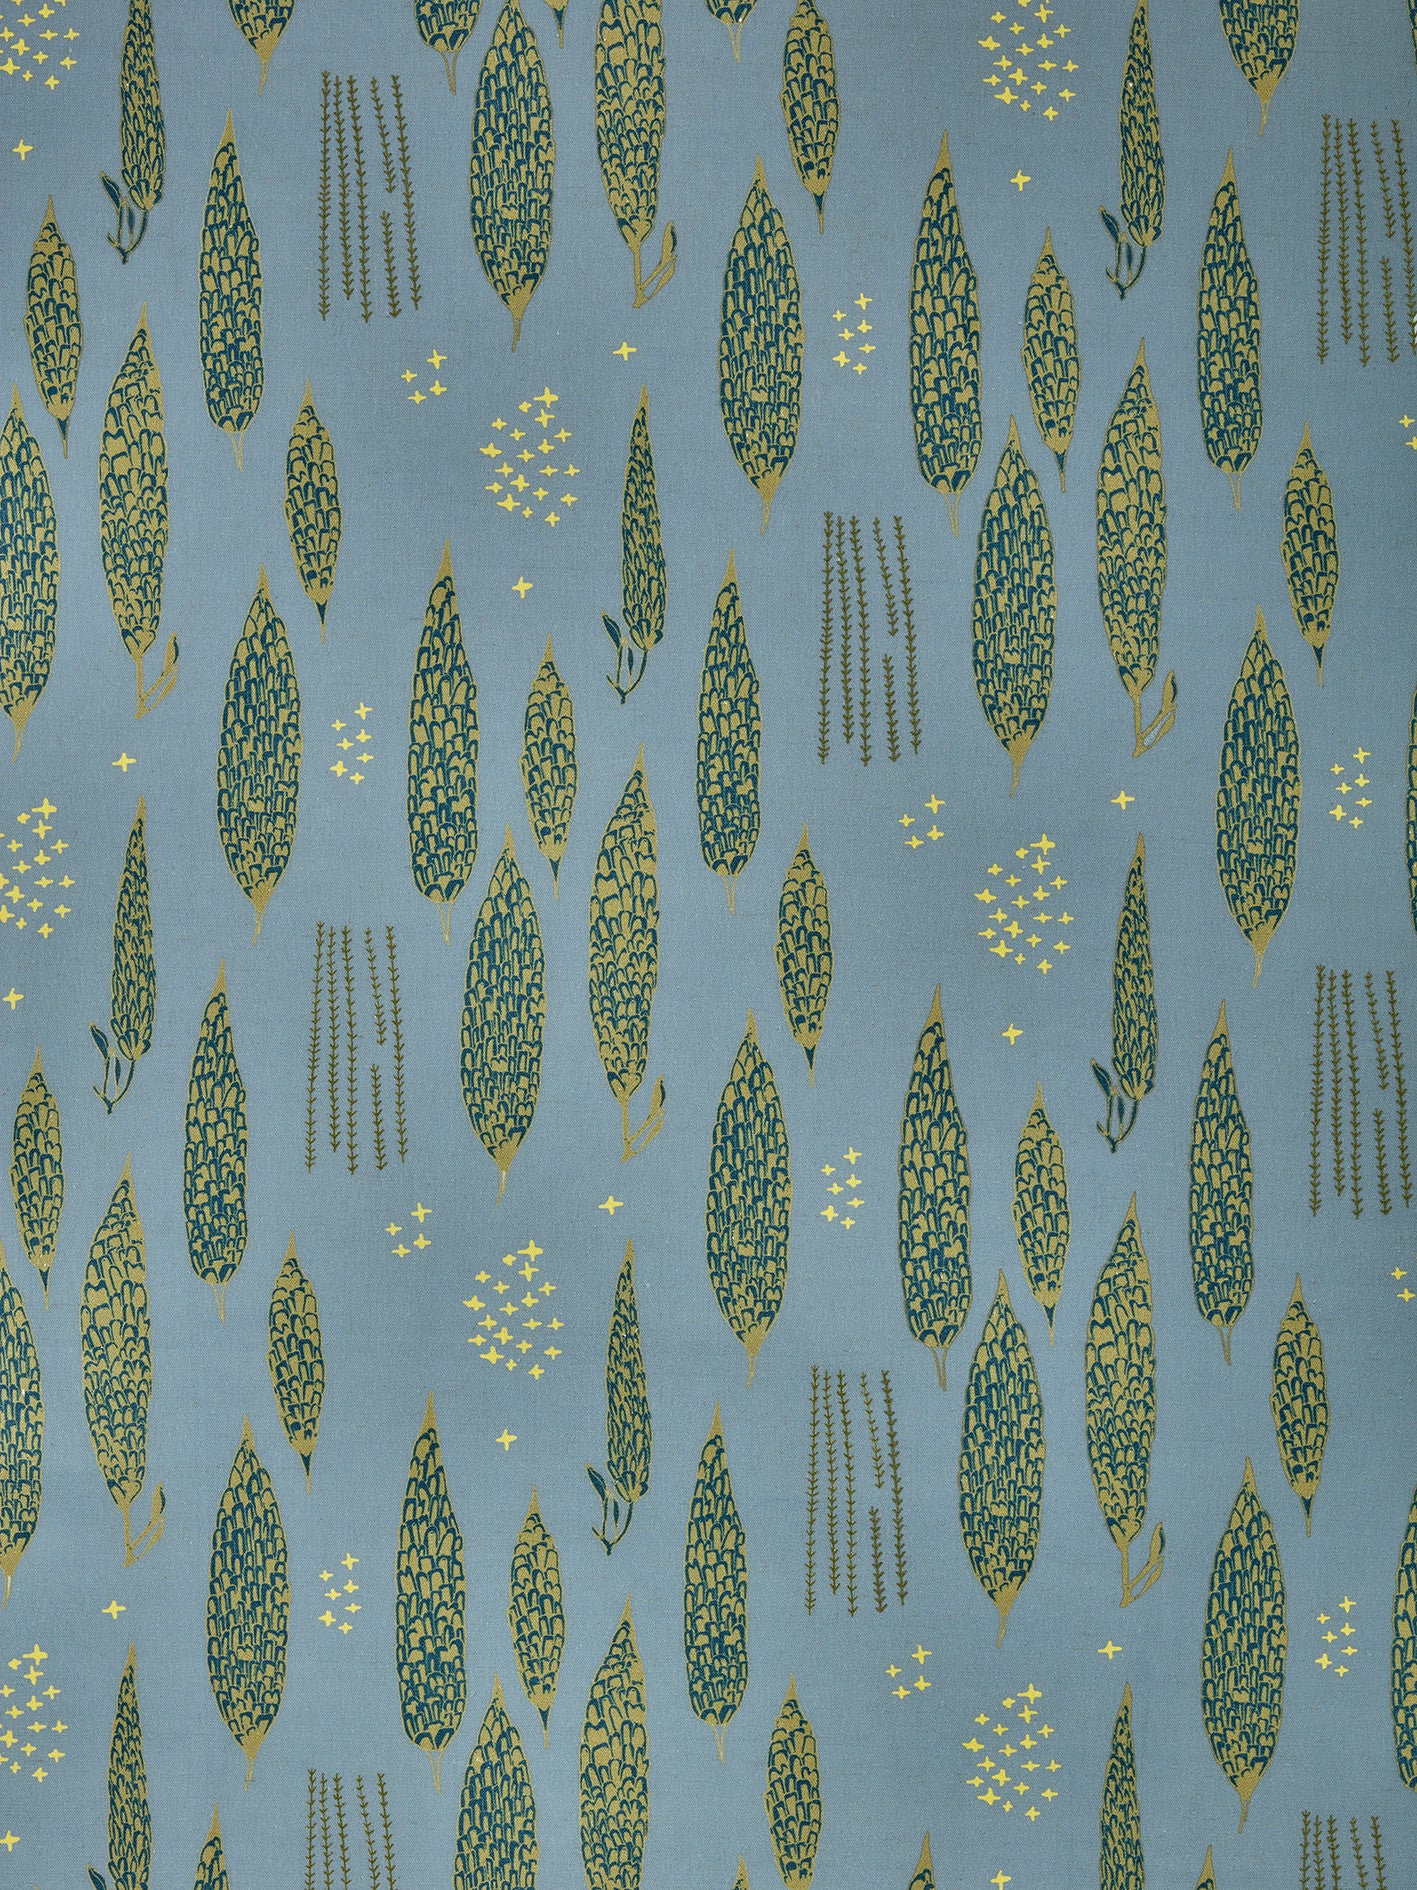 Graphic Rosemary Sprig Pattern Printed Linen Cotton Canvas Fabric in Light Winter Blue, Antique Moss Green and Dark Petrol Blue